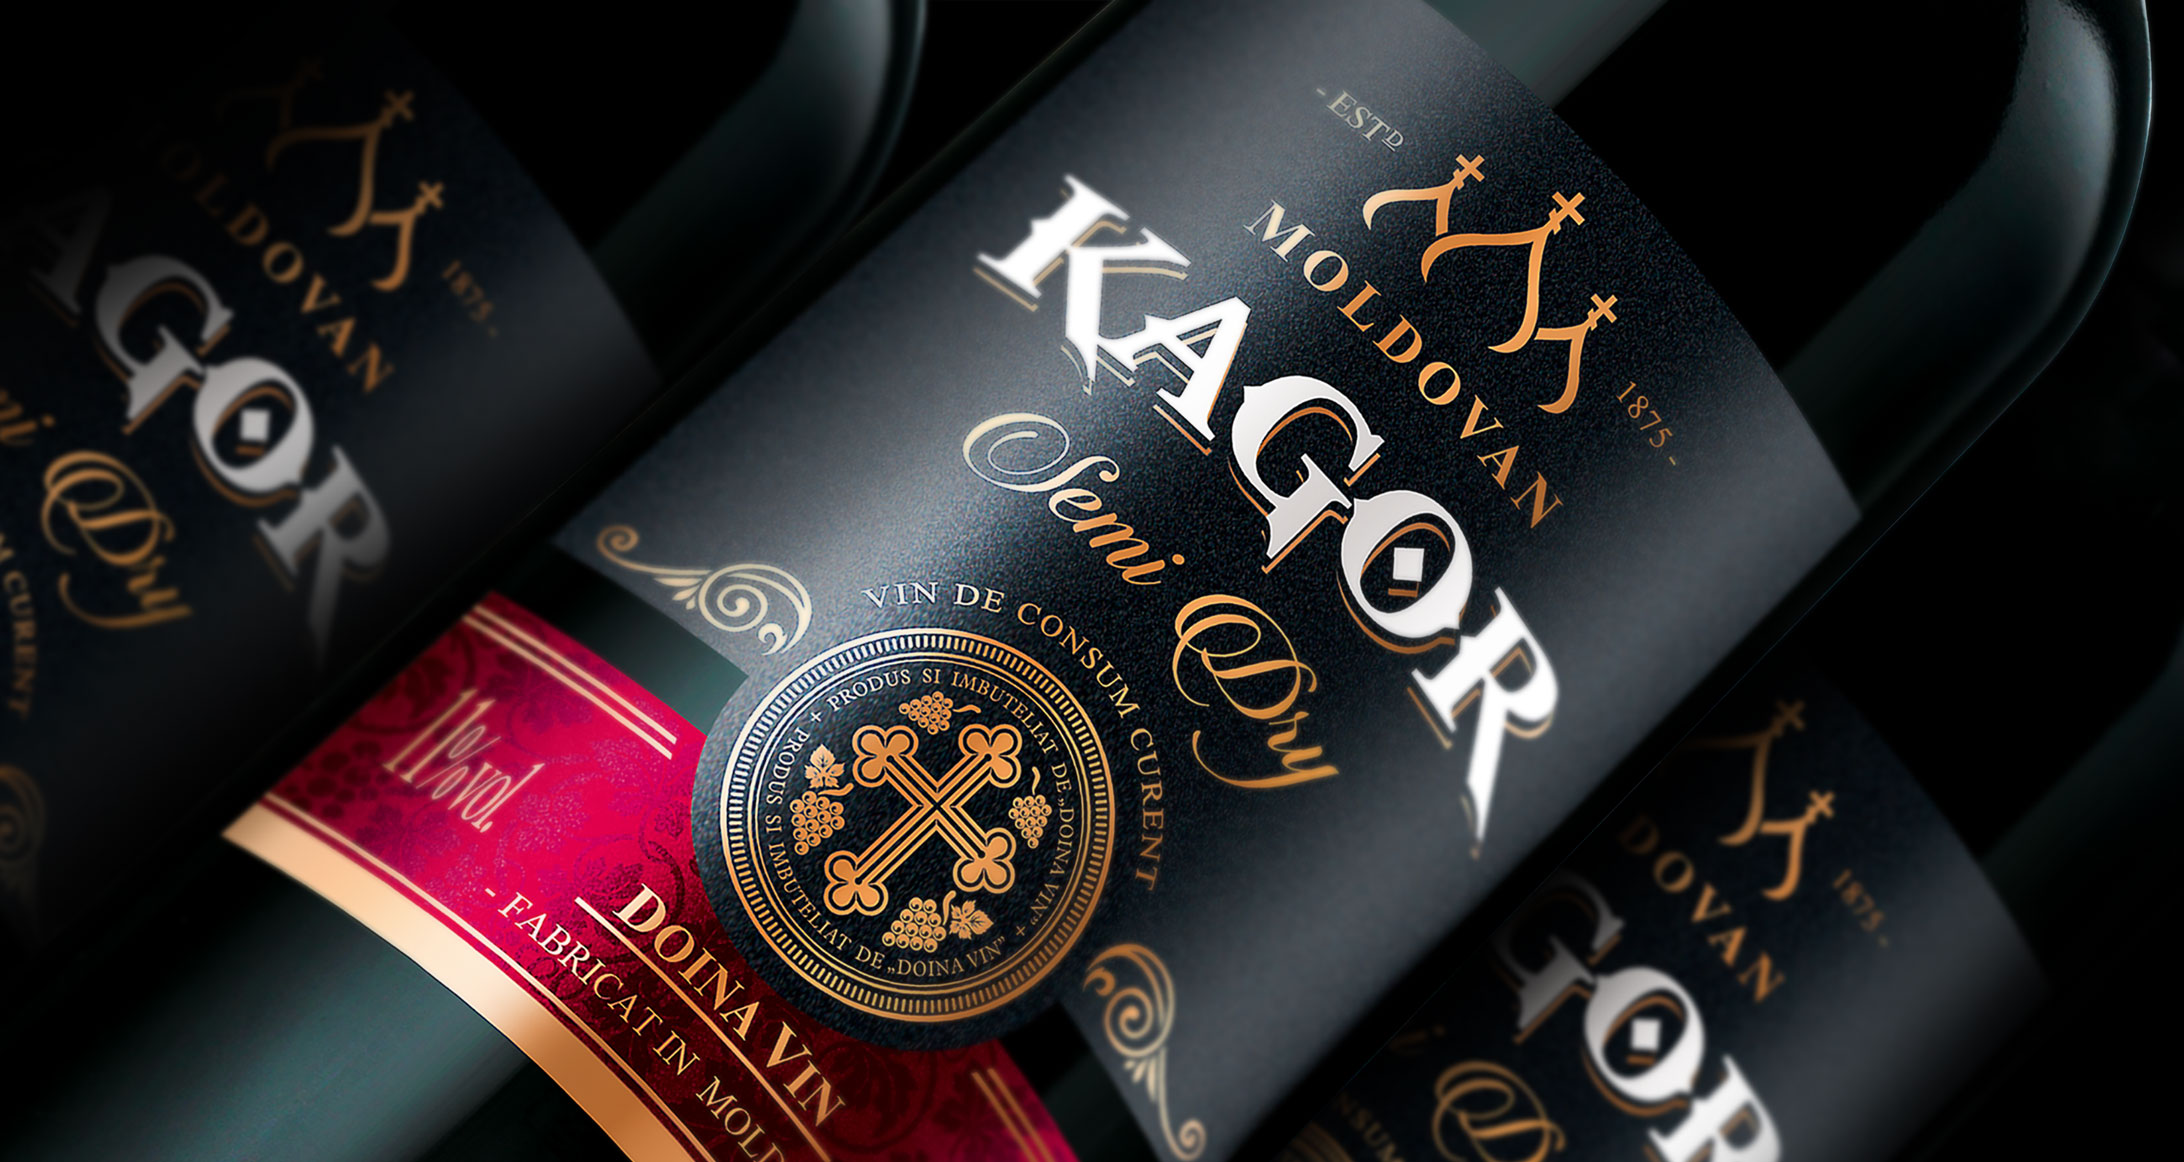 kagor wine new packaging design